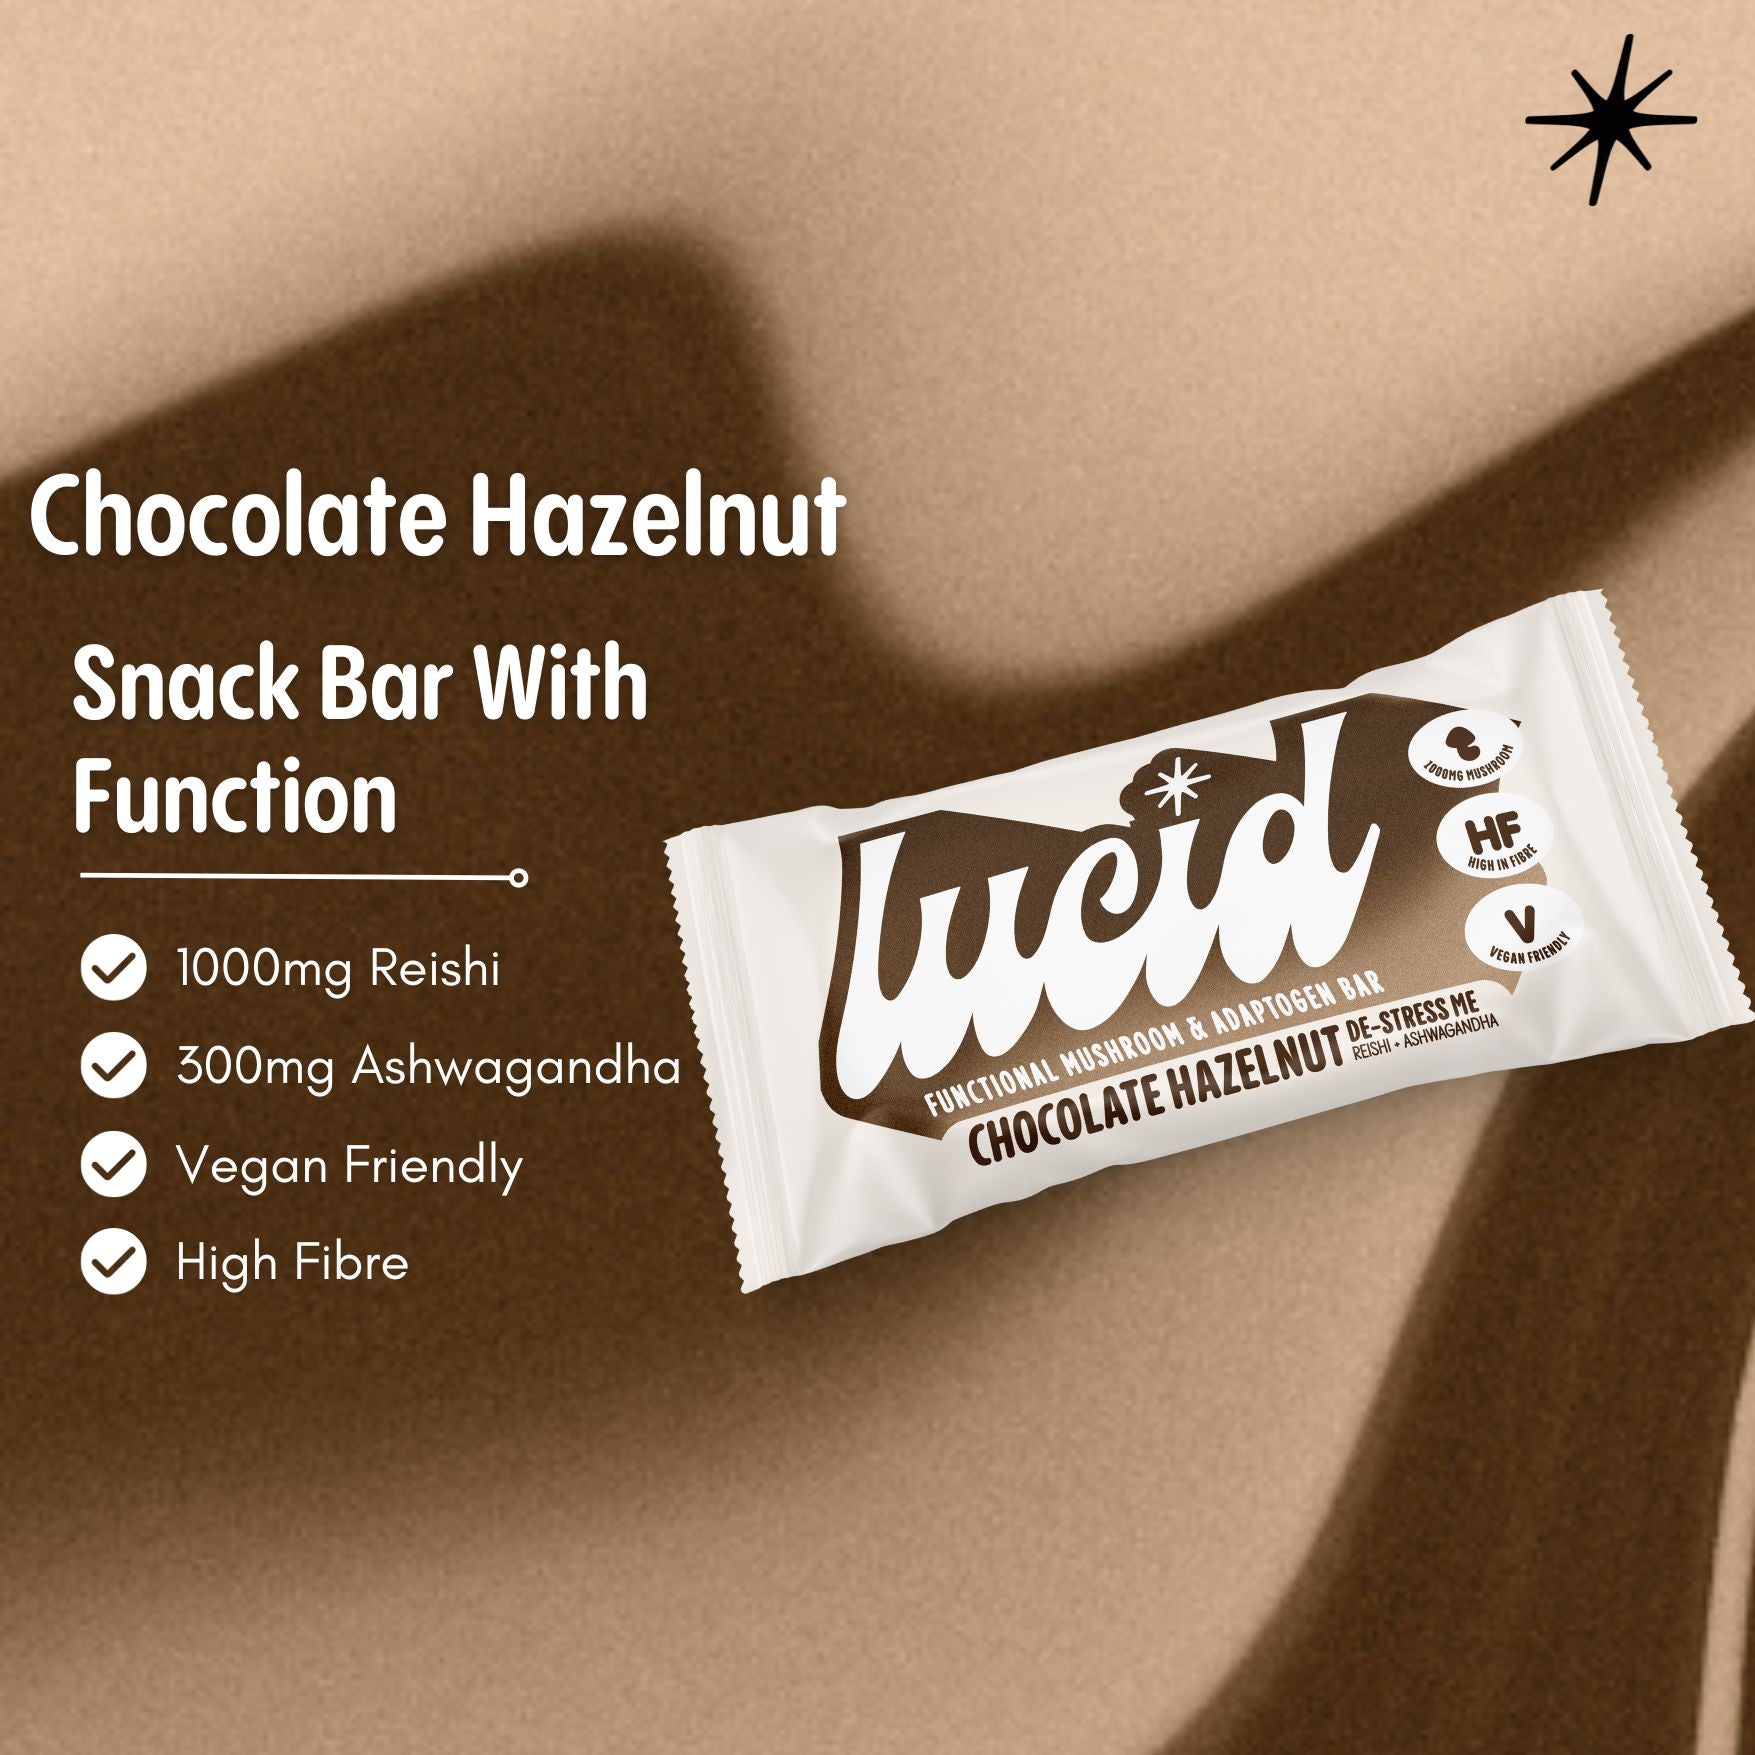 Lucid bar with distinct chocolate hazelnut swirl pattern backdrop, highlighting key USPs like 'functional mushrooms and adaptogens', 'vegan friendly', and 'high-fibre'. Premium health snack for mindful consumption.